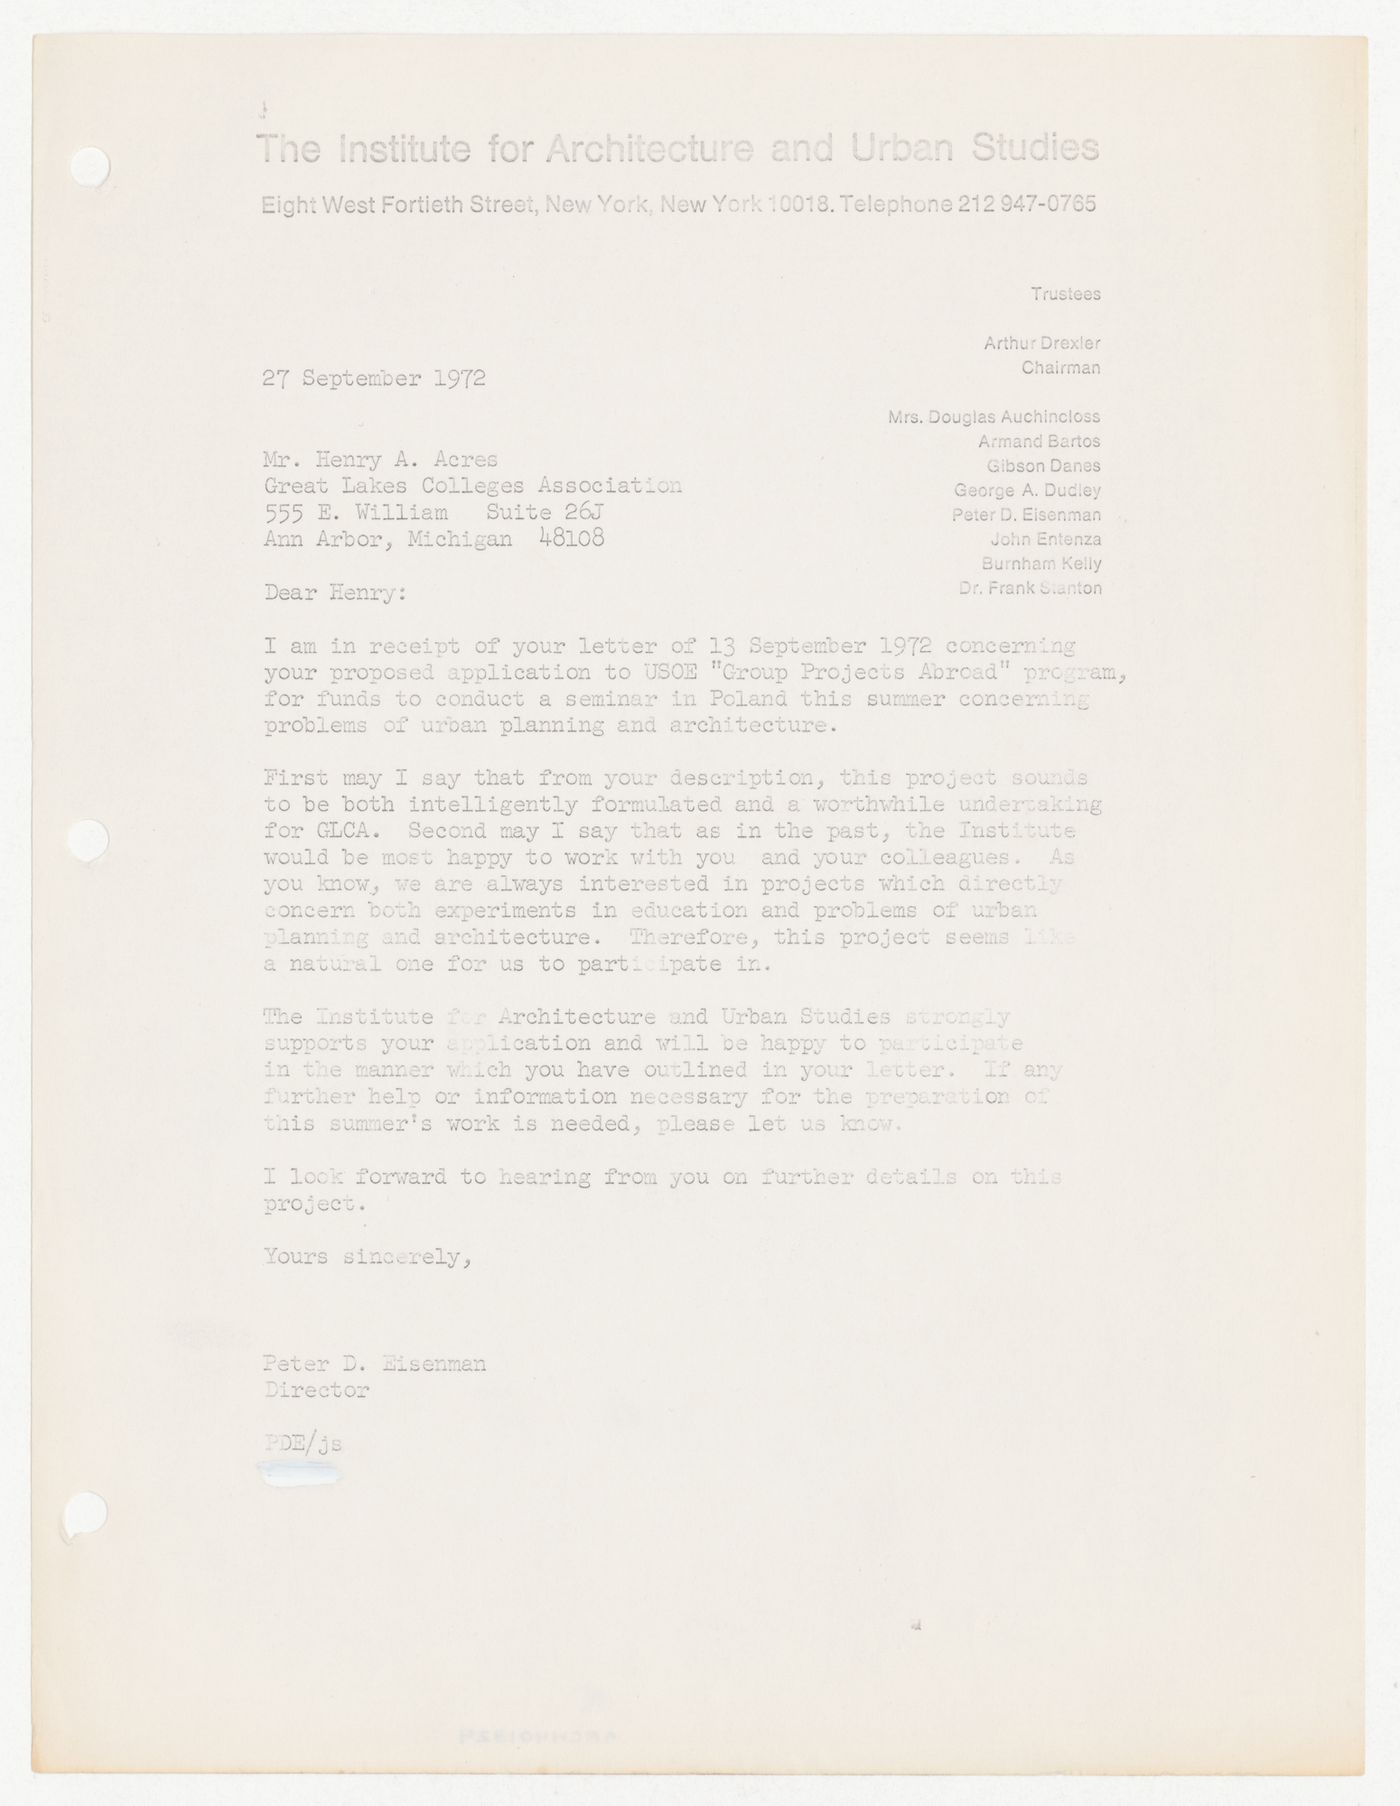 Letter from Peter D. Eisenman to Henry A. Acres about IAUS support for a proposed seminar in Poland